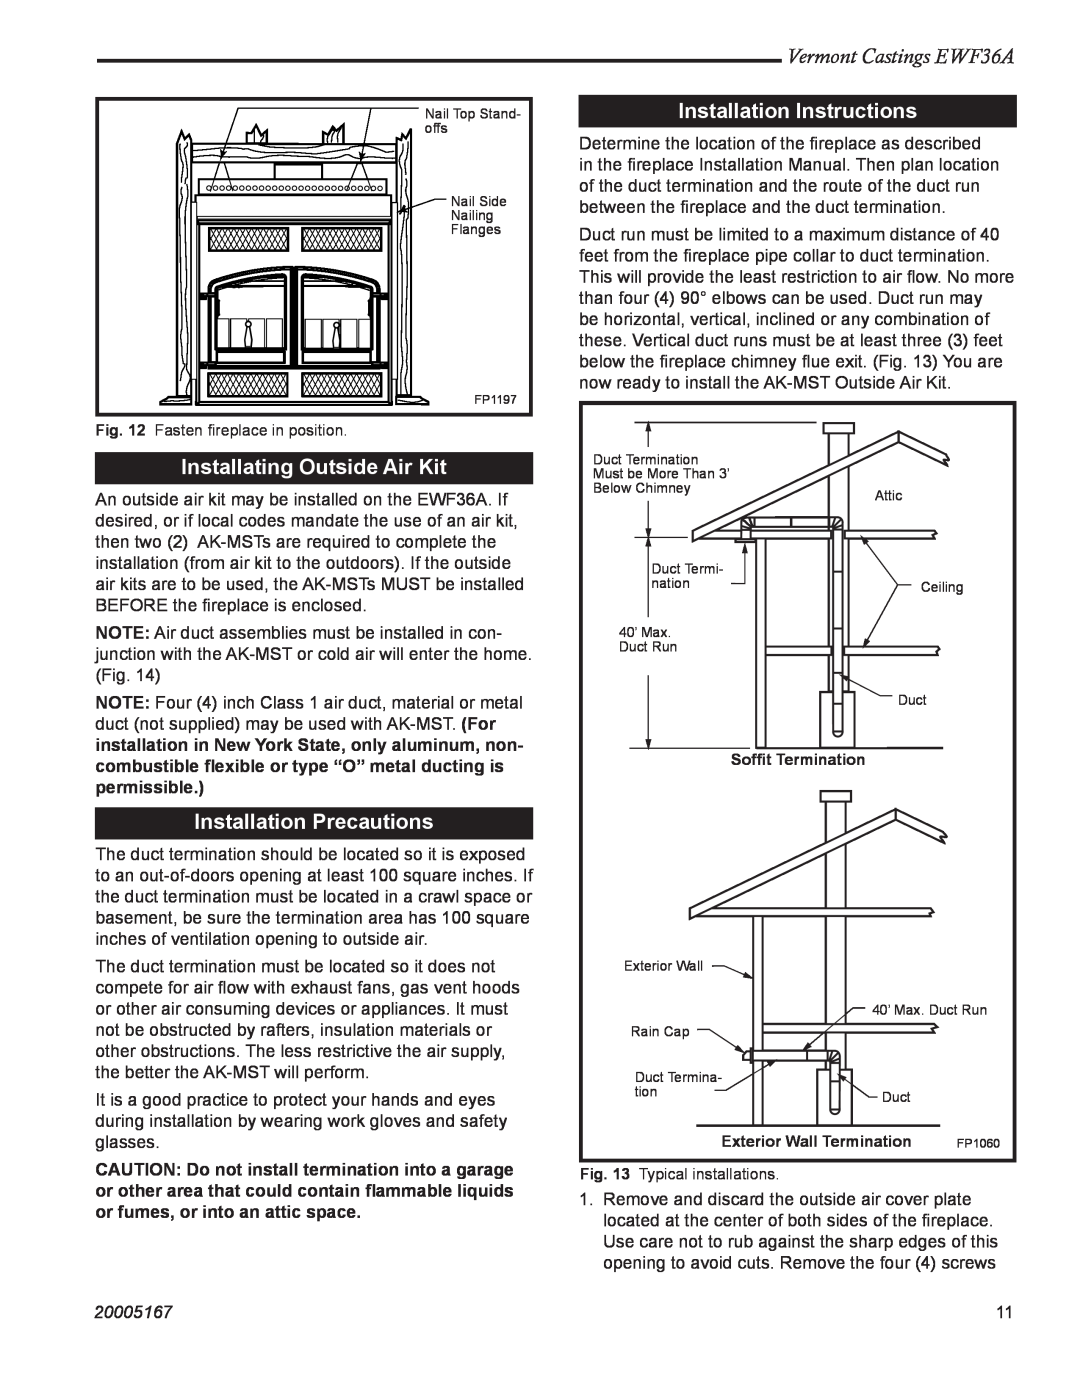 MHP manual Installation Instructions, Installating Outside Air Kit, Installation Precautions, Vermont Castings EWF36A 